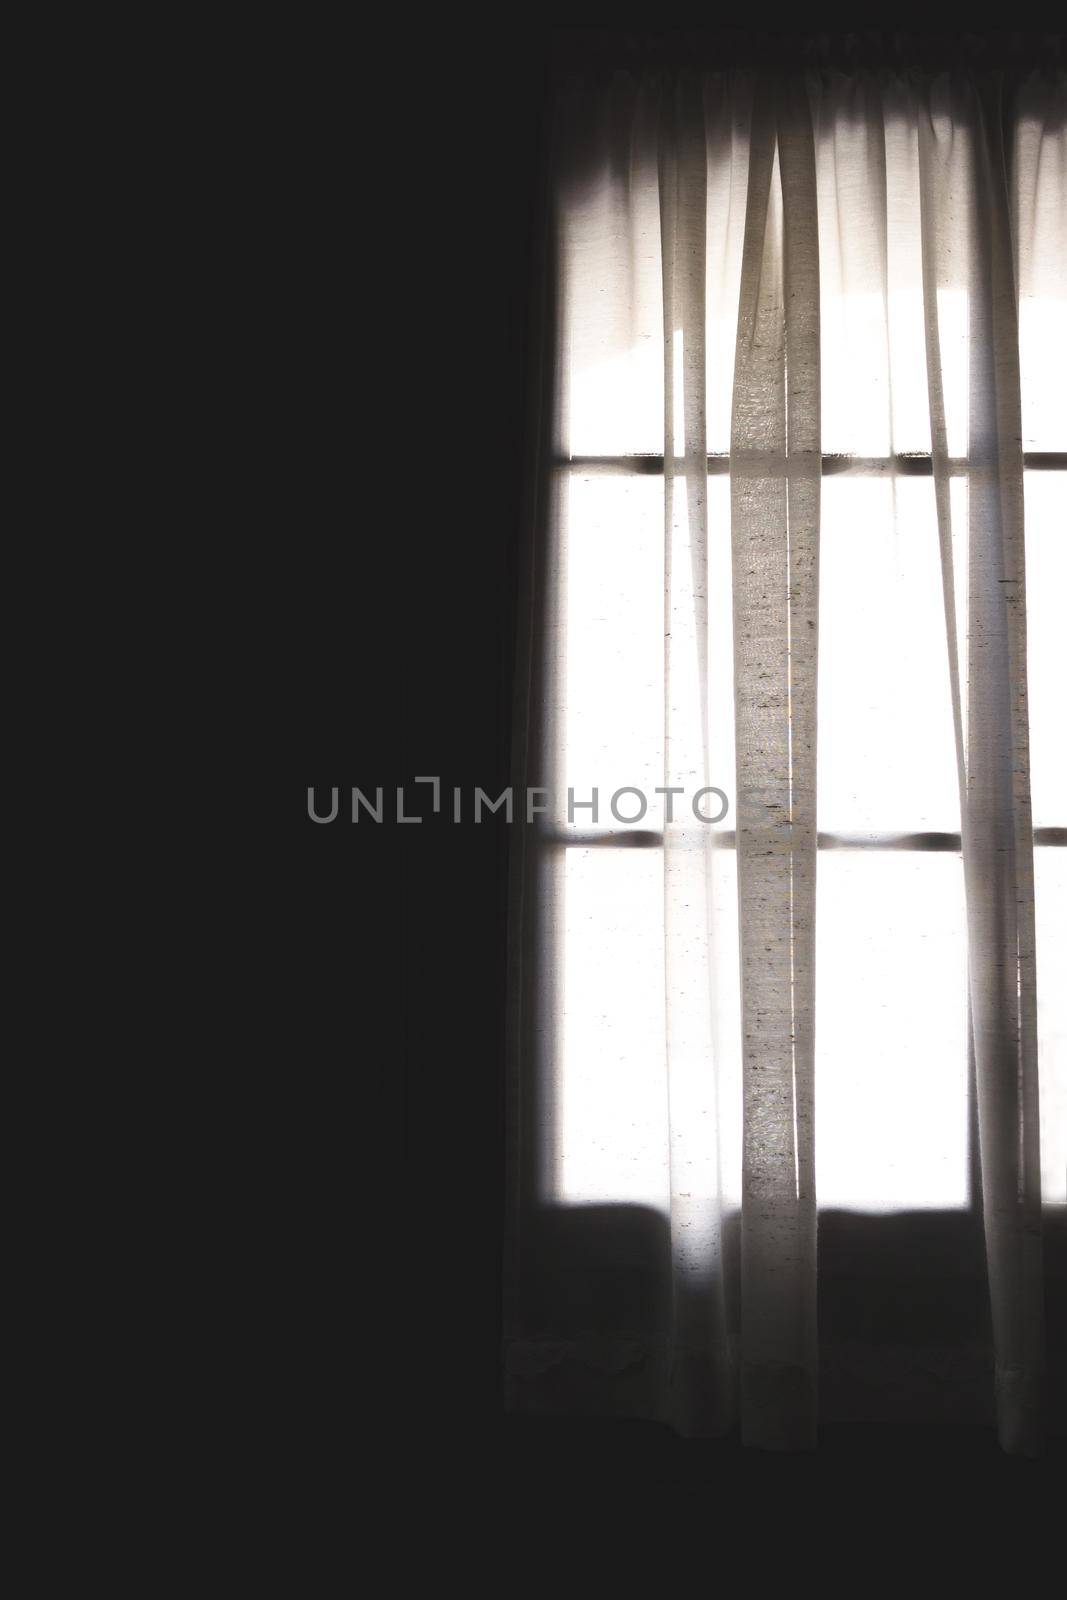 Transparent curtain with big window behind taken from room interior. Soft light shining through window. Shadows and lights. Space for text.